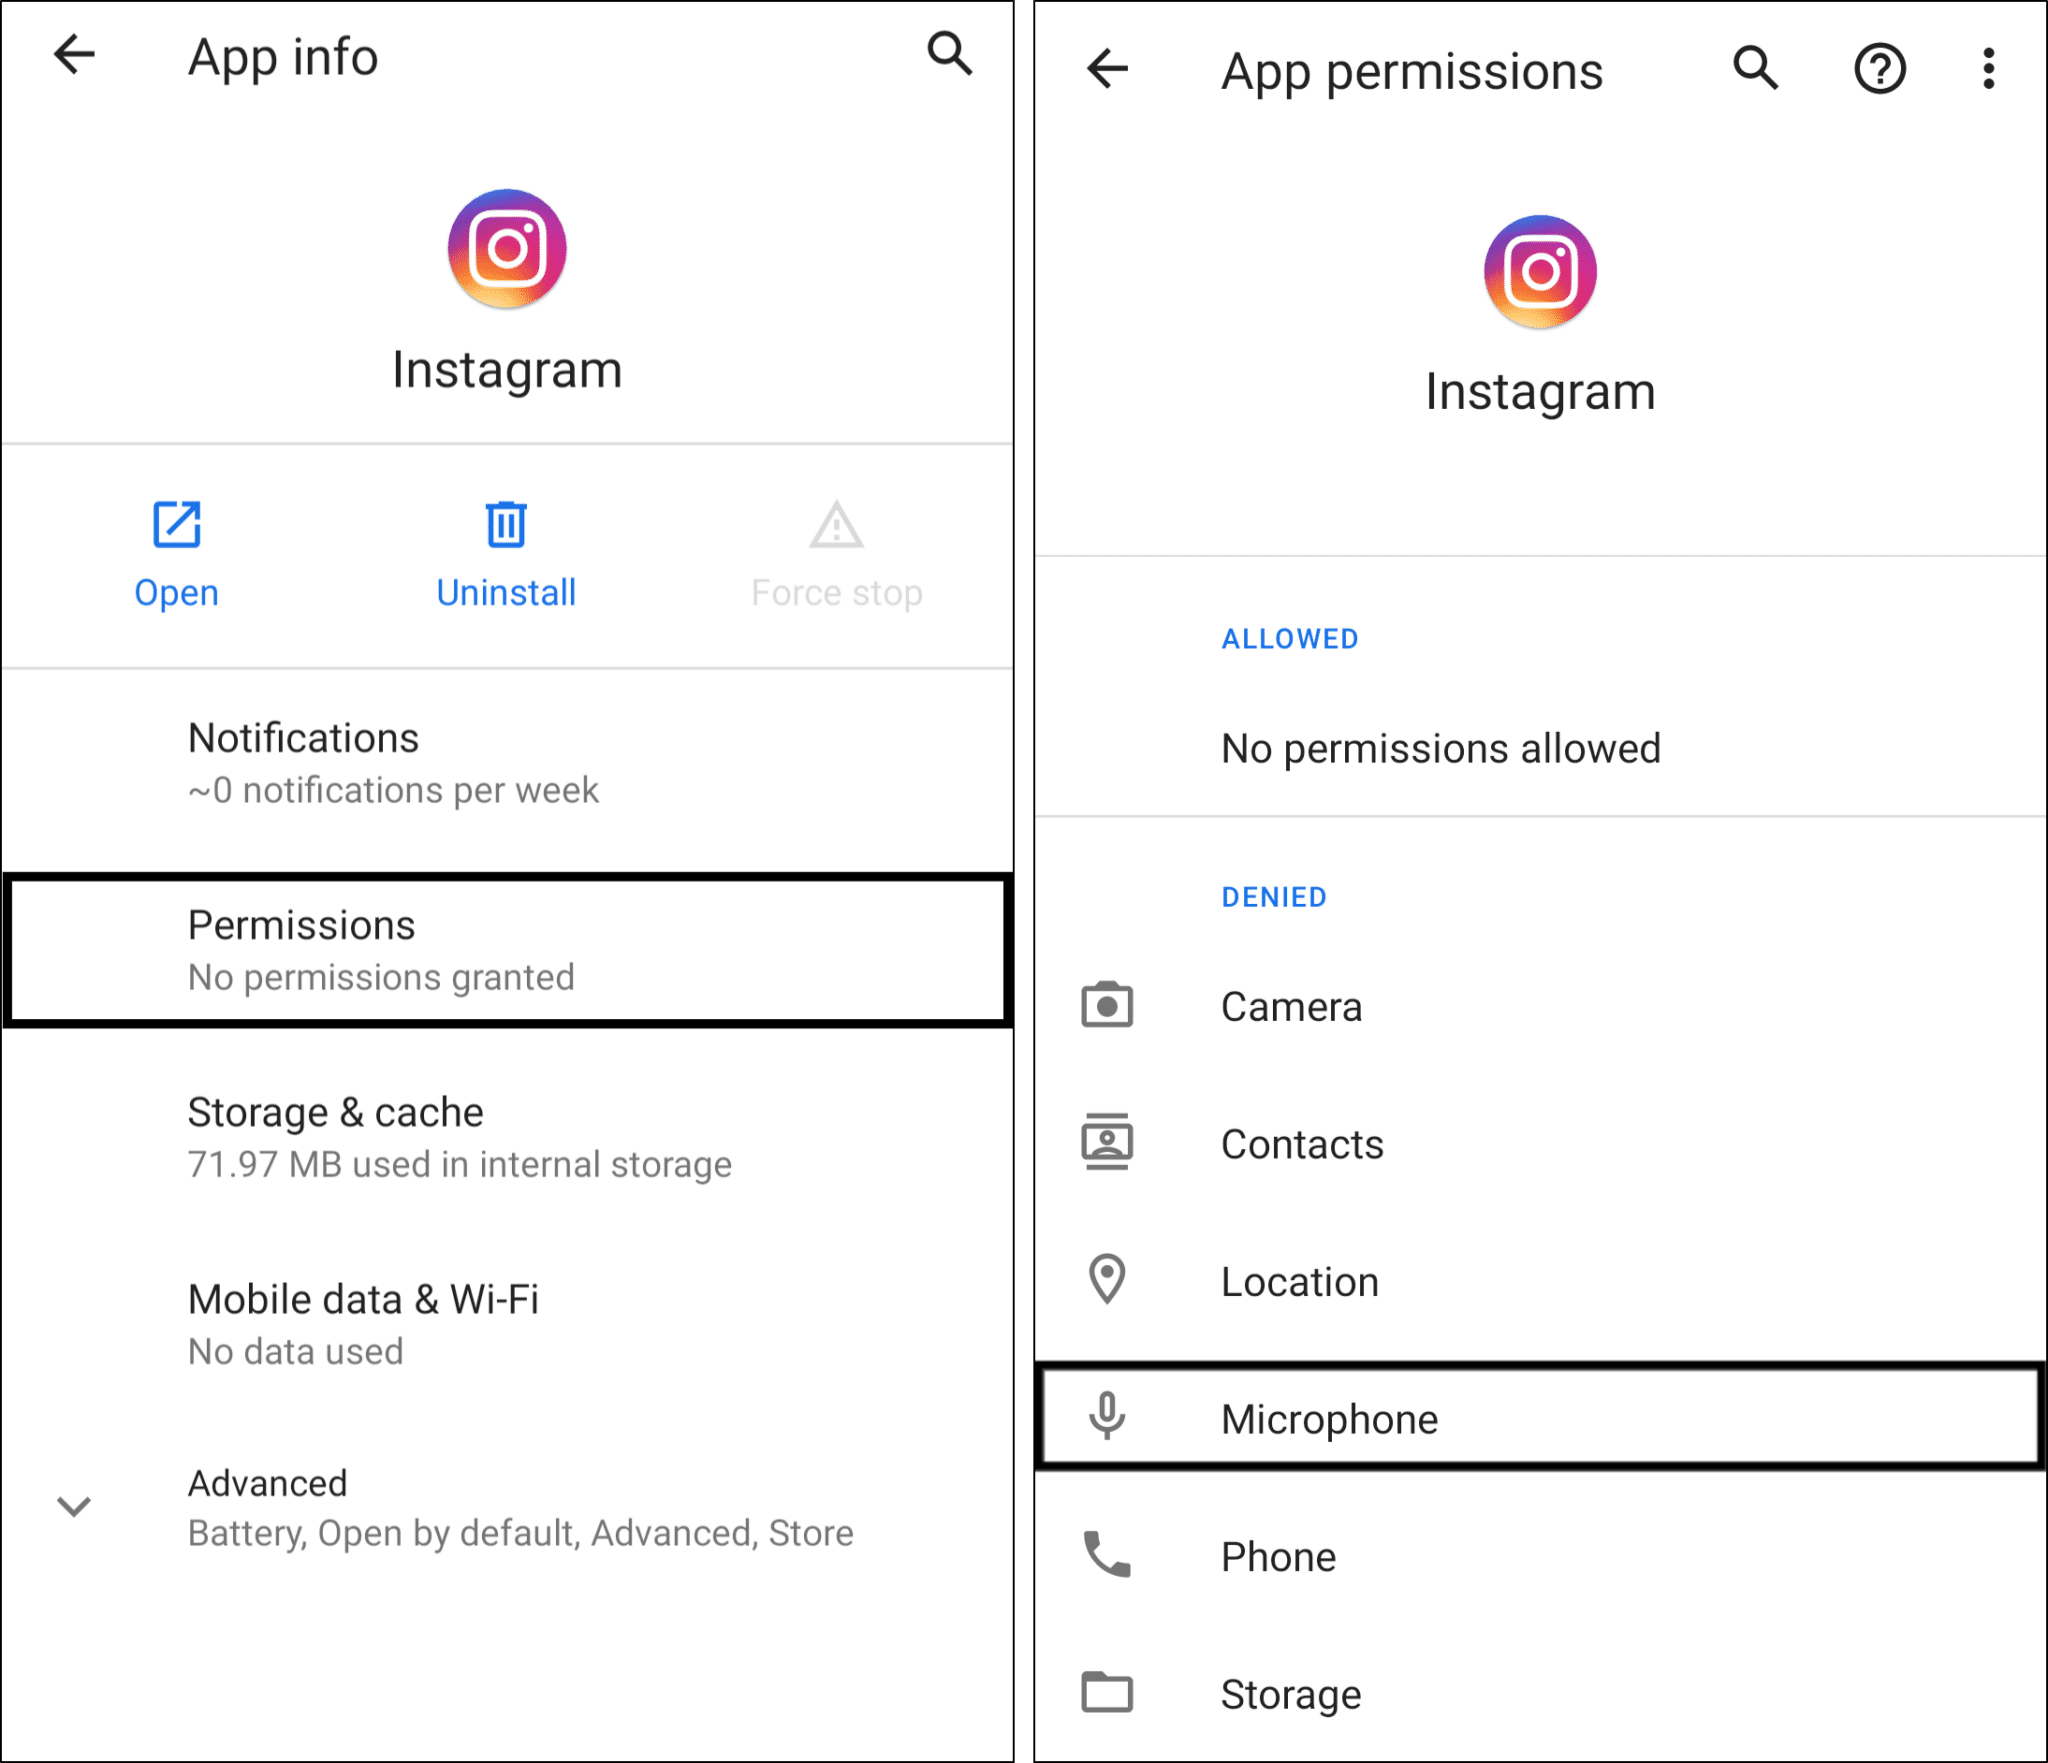 allow microphone permission for Instagram app on Android to fix Instagram microphone or voice/audio message/note not working, sending or playing